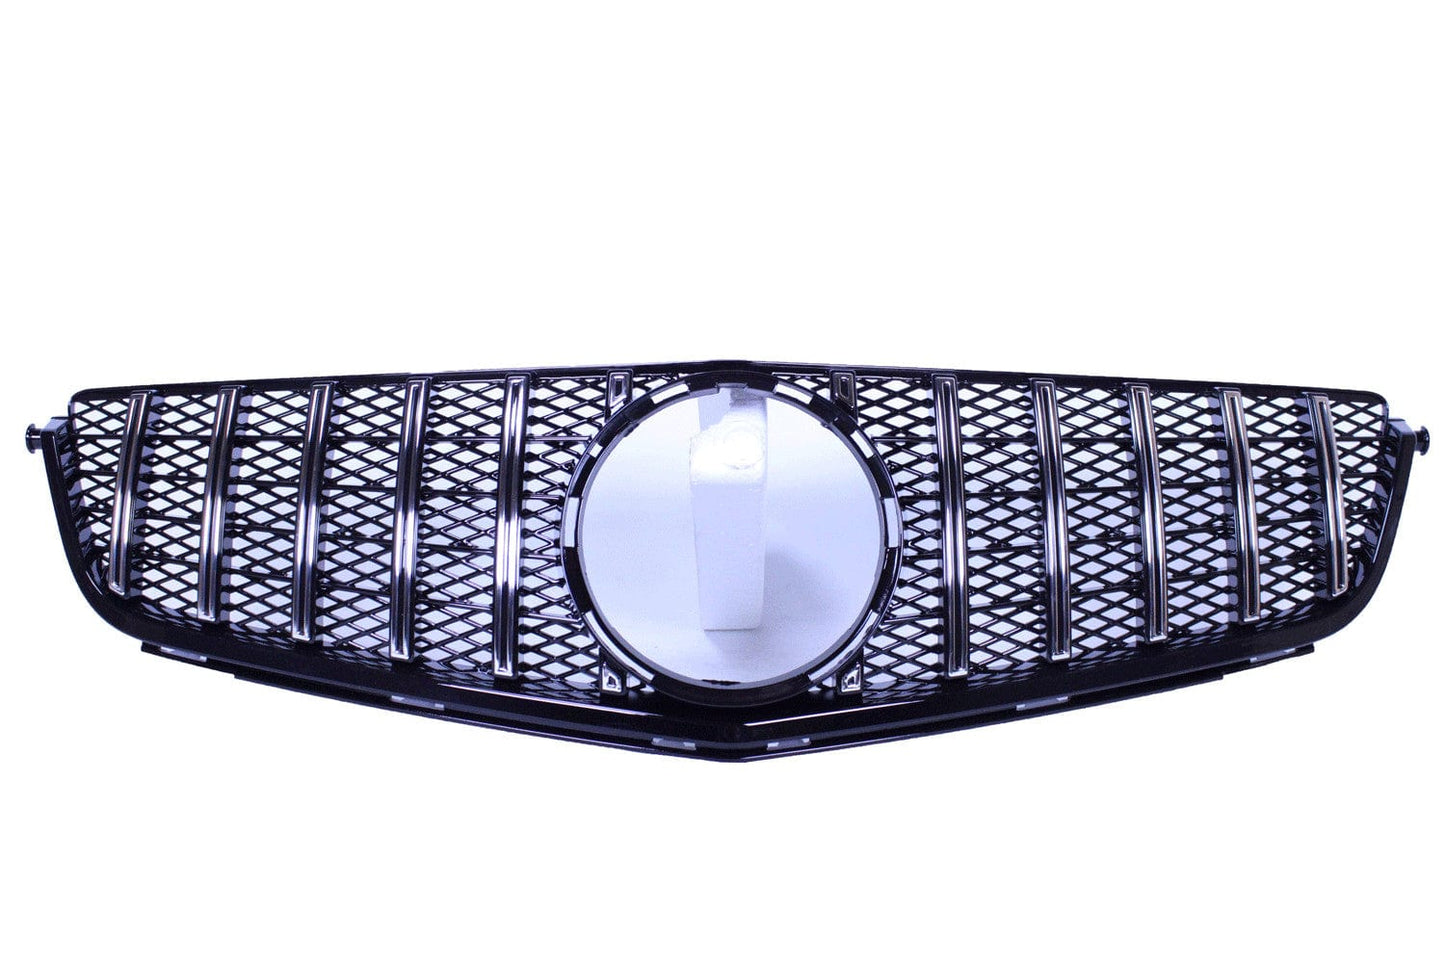 Grill compatible with Mercedes W204 C63 AMG facelift black chrome